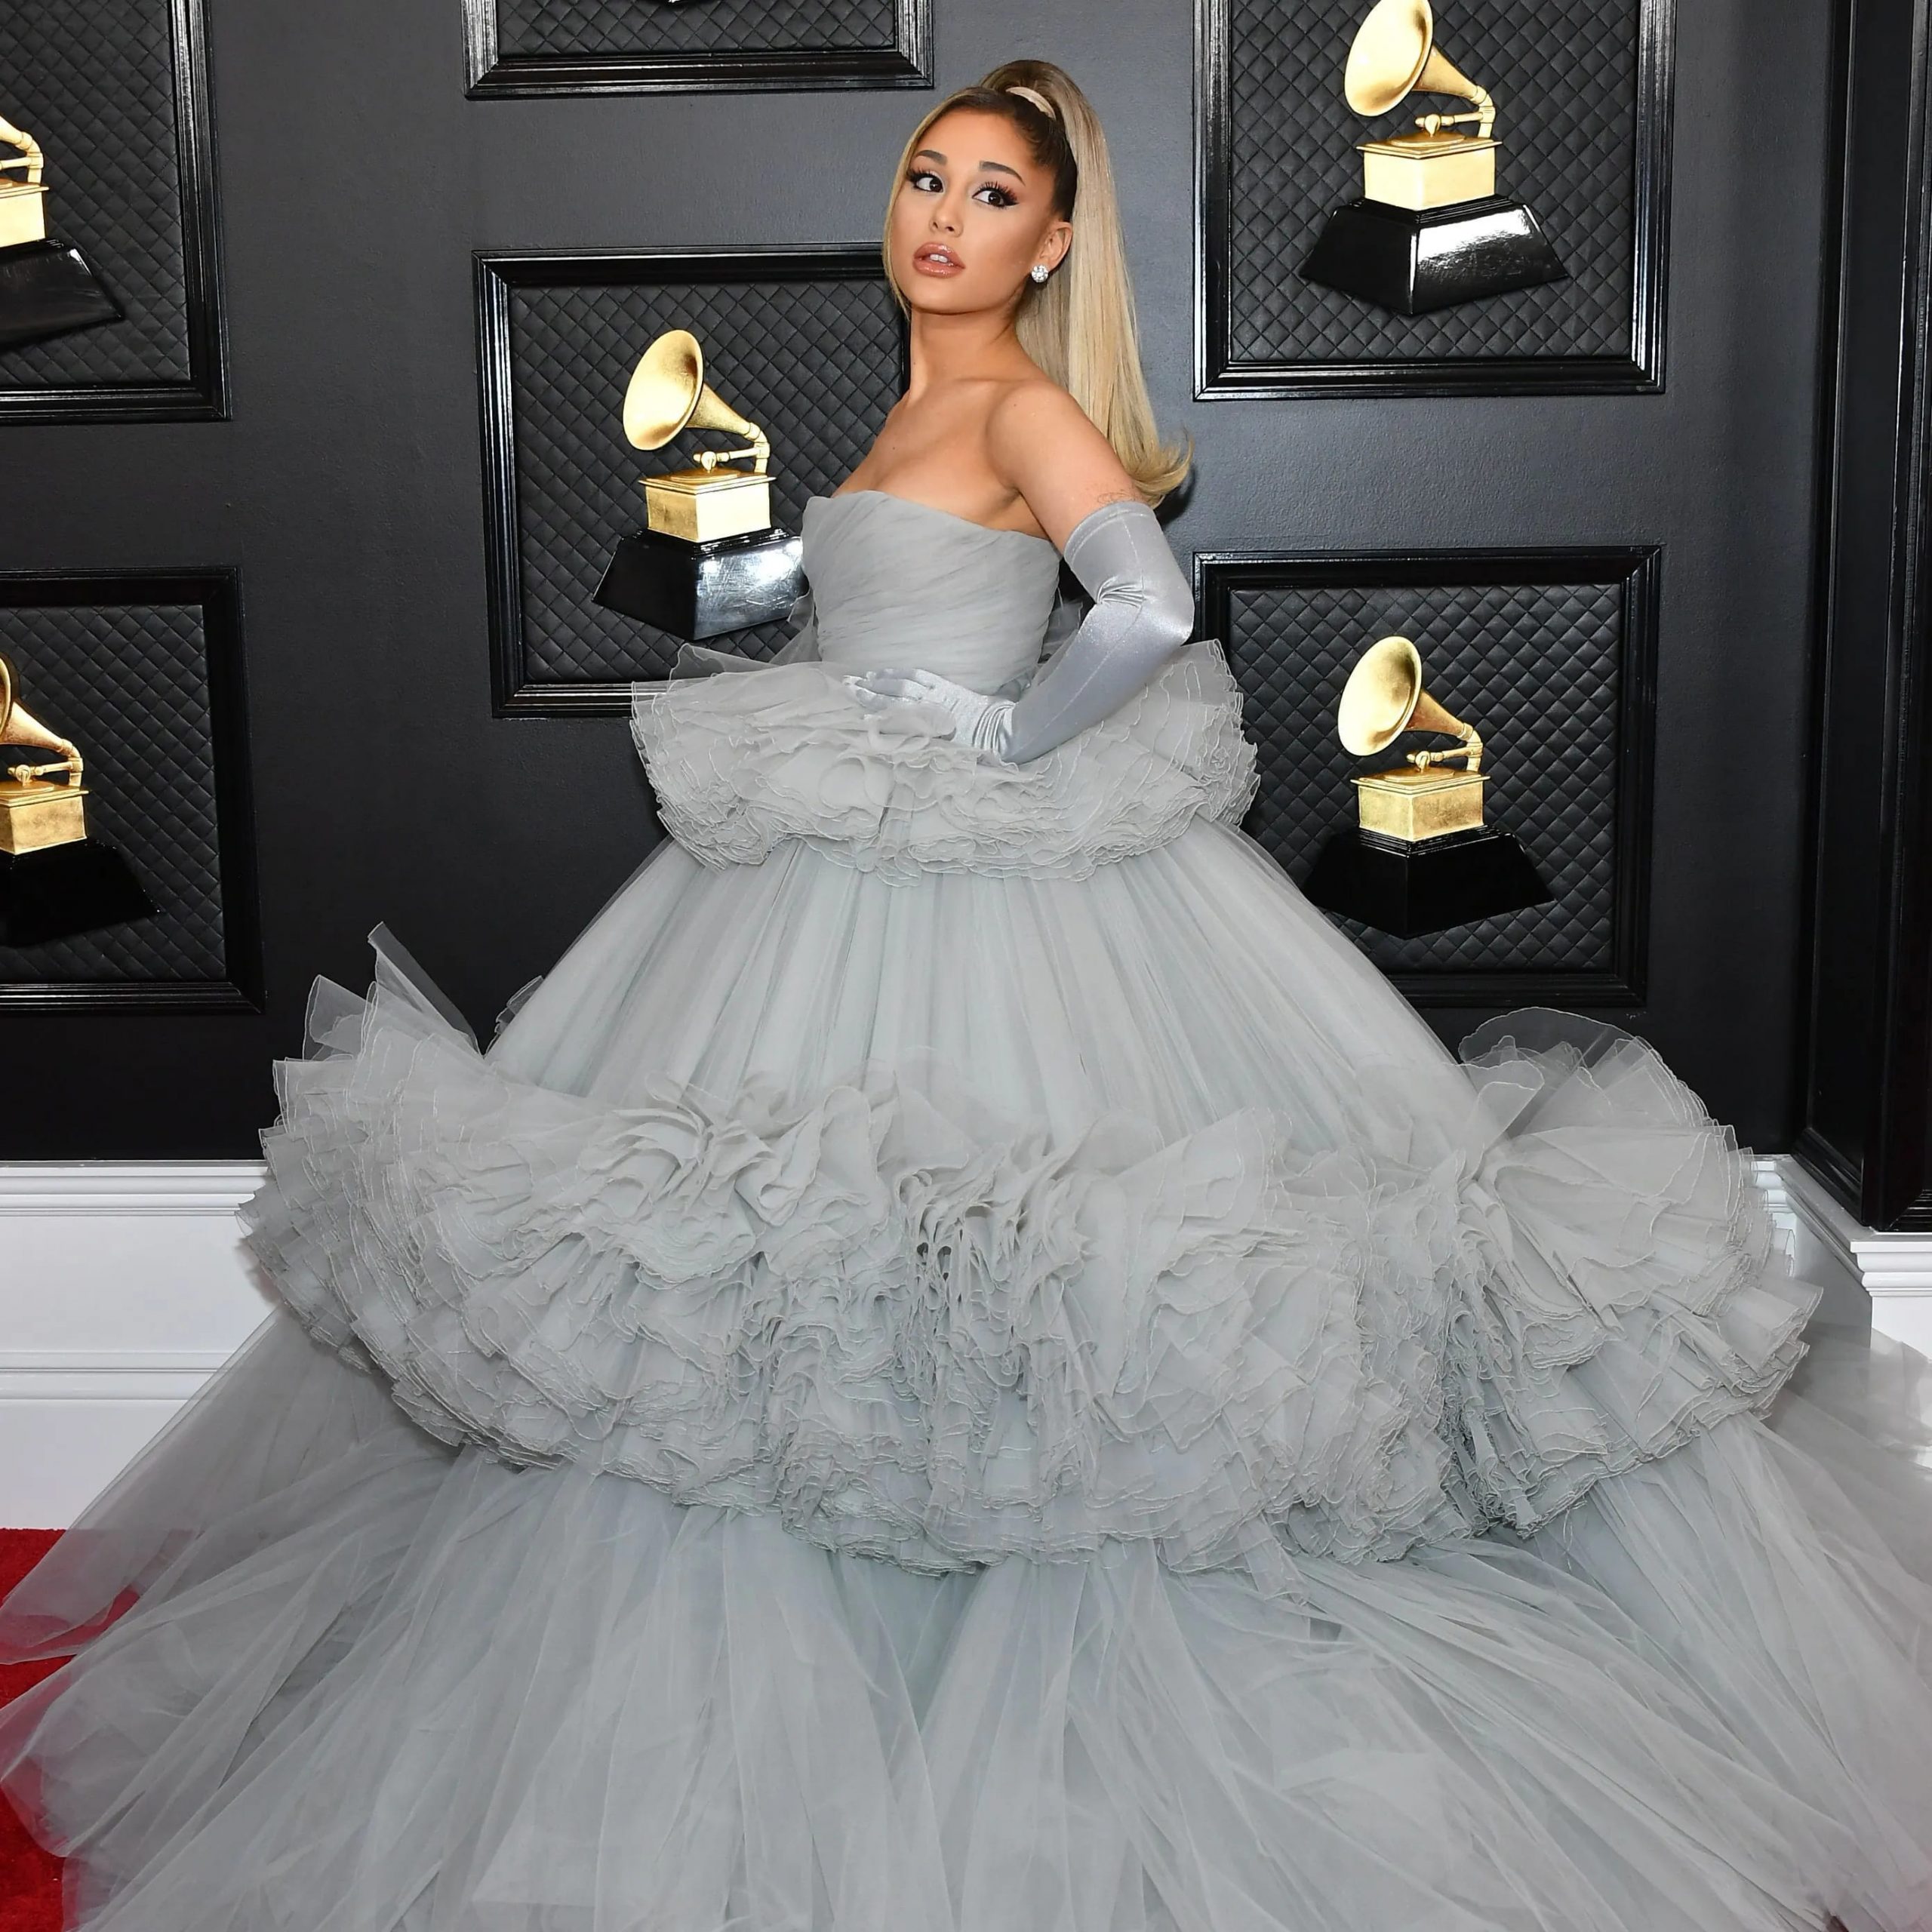 Ariana Grande - Outfits, Style, & Looks